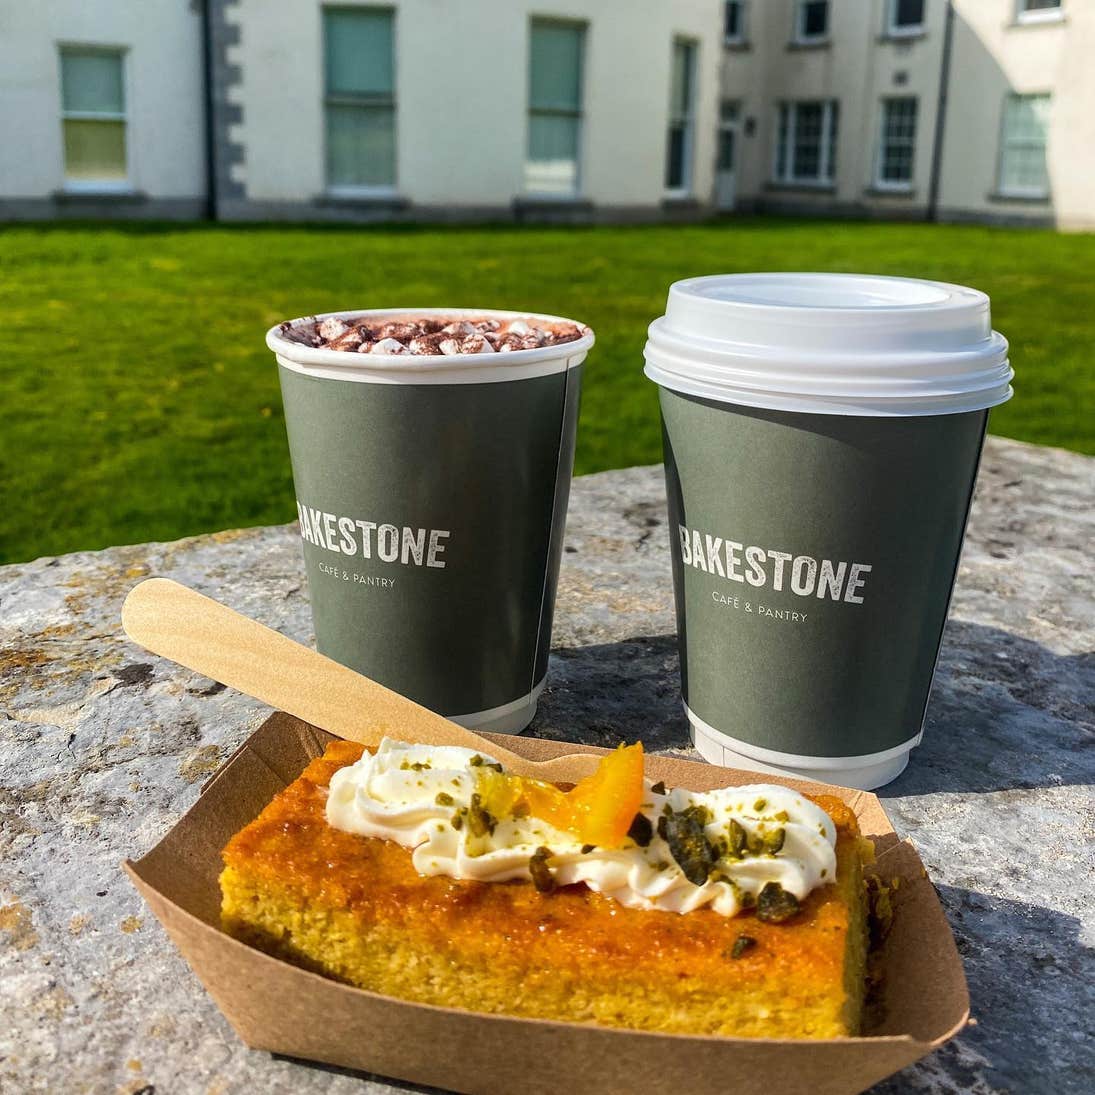 Two cups of hot chocolate and a dessert from Bakestone Café in Cork.